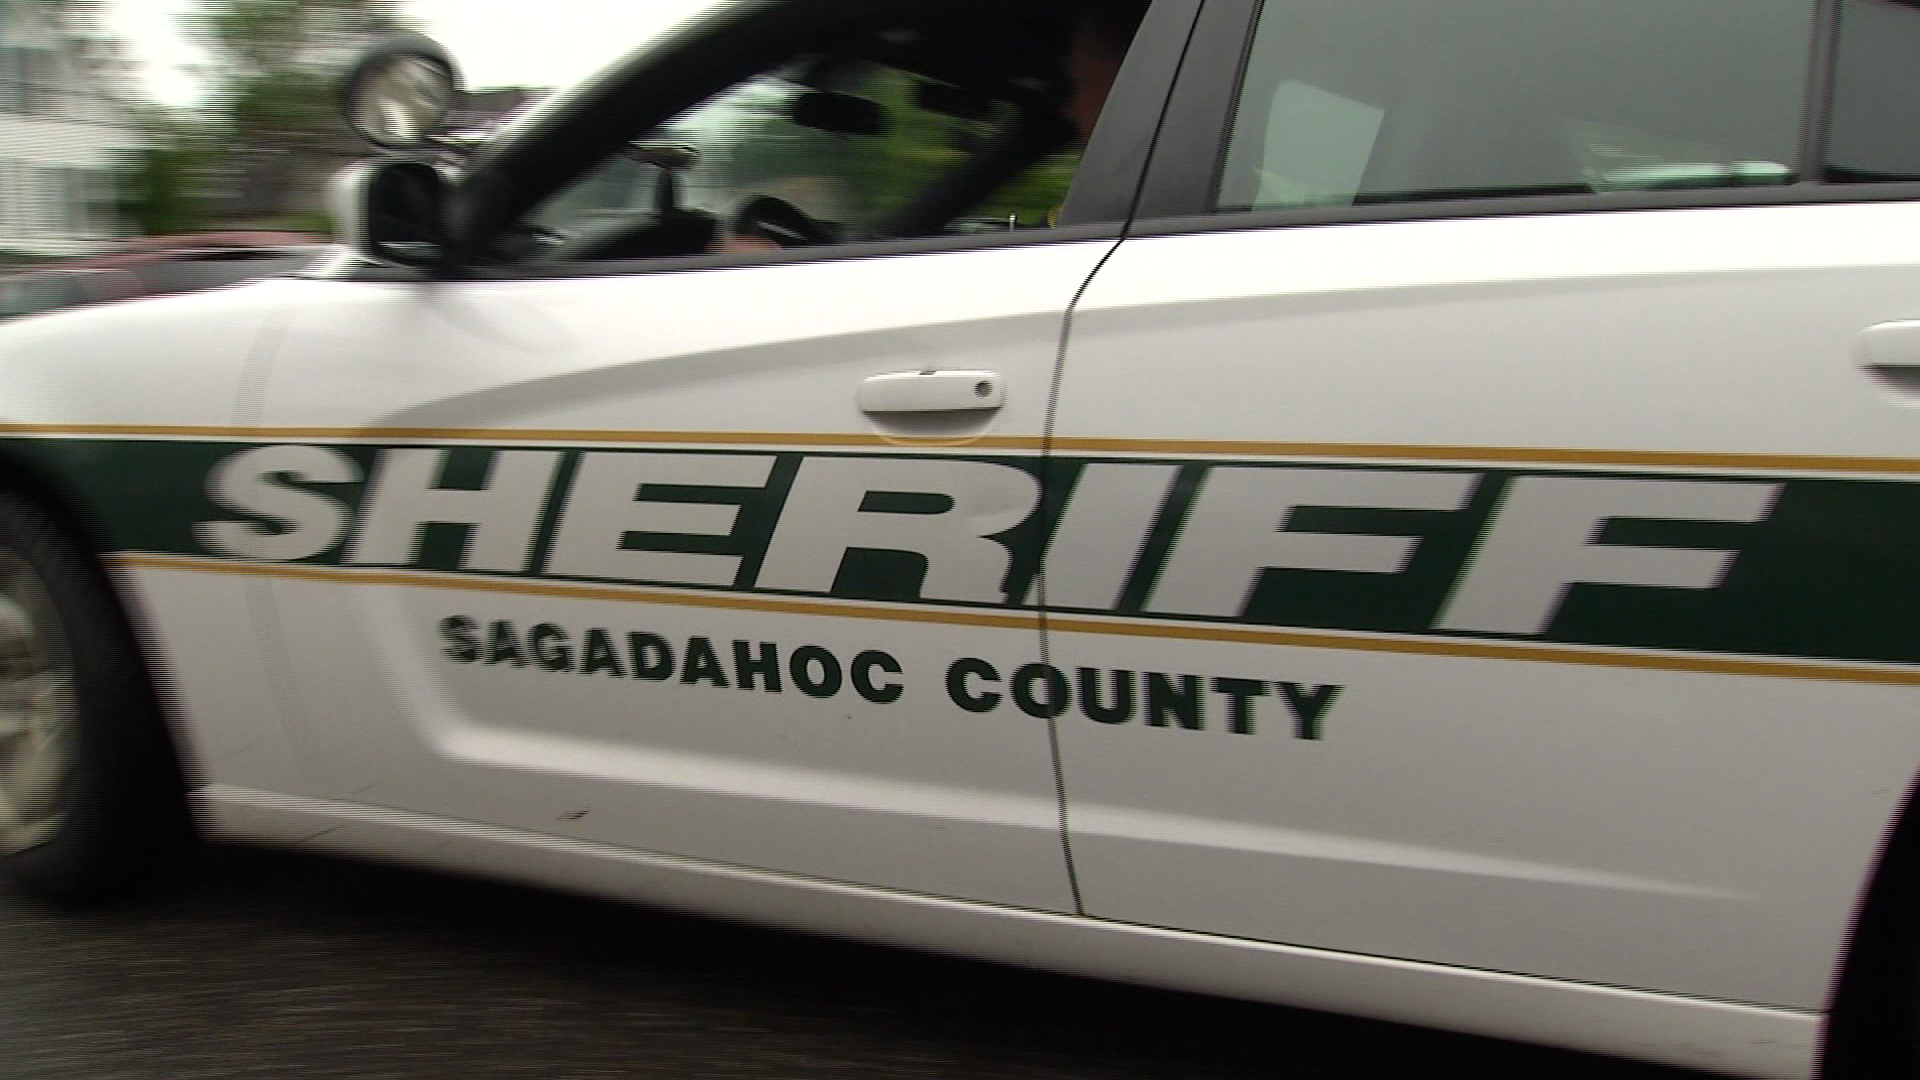 Sagadahoc County Sheriff's Office Deputy Aaron Skolfield tried to make contact with Robert Card but said the Army downplayed concerns shared by a fellow officer.